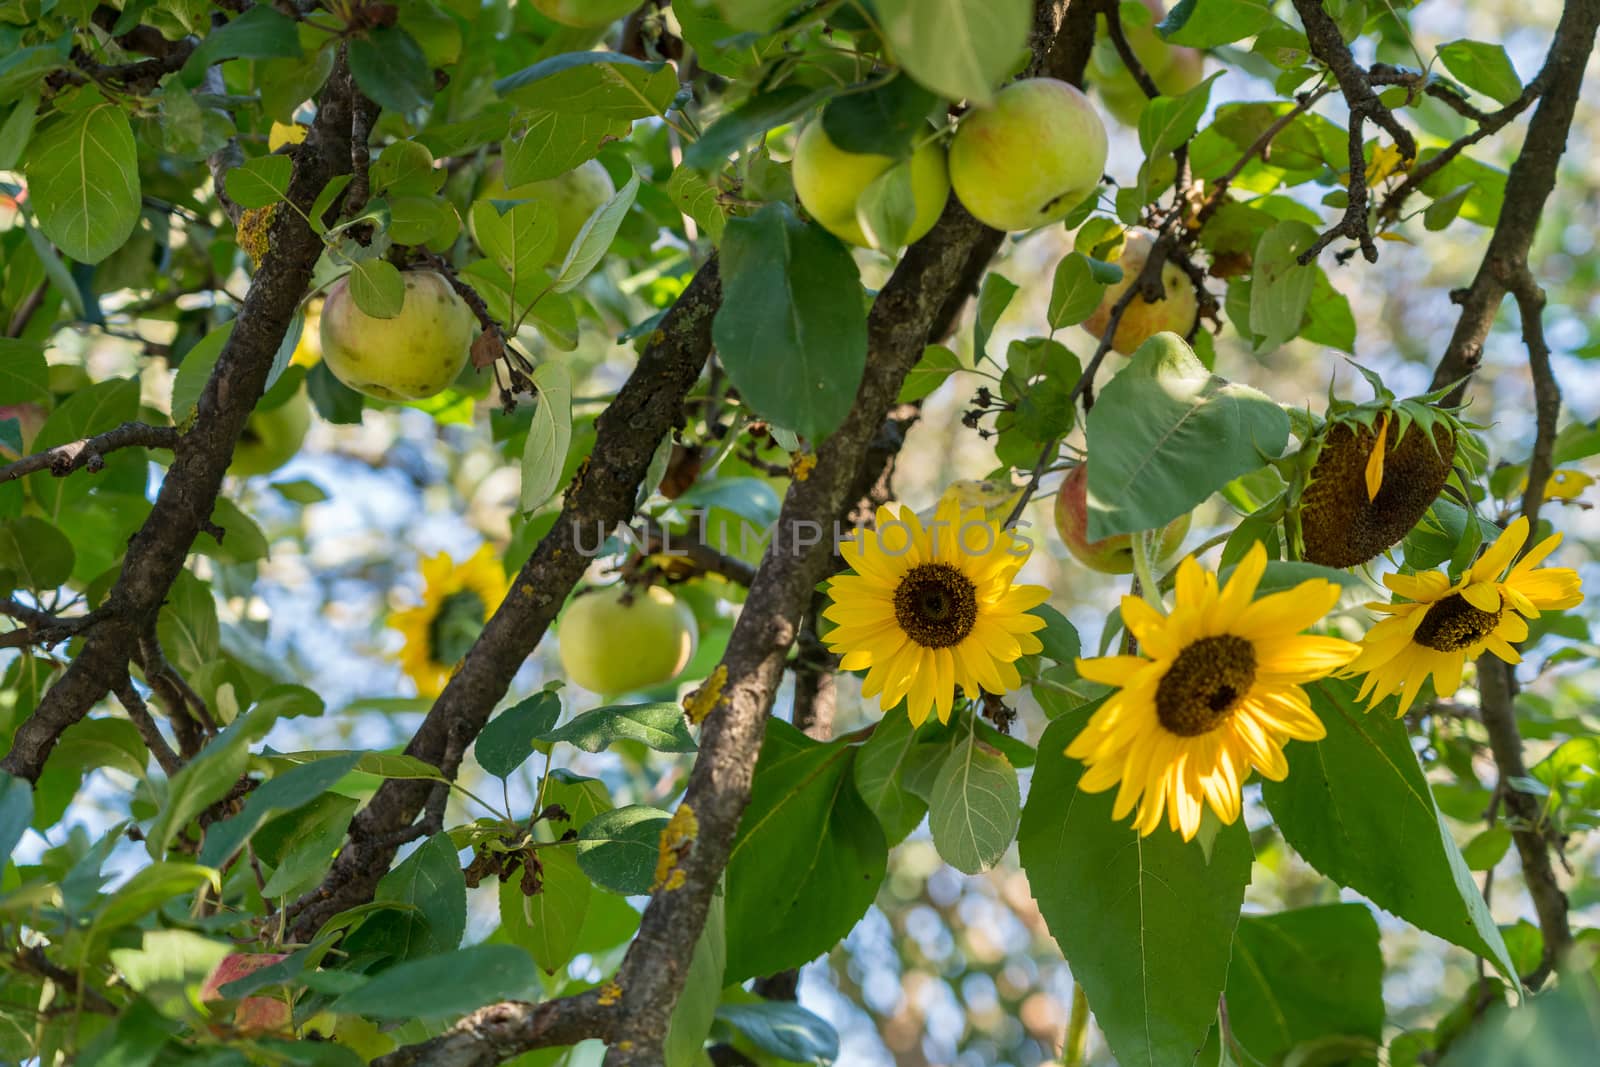 Sunflowers and Apples growing in a garden in Romania by phil_bird